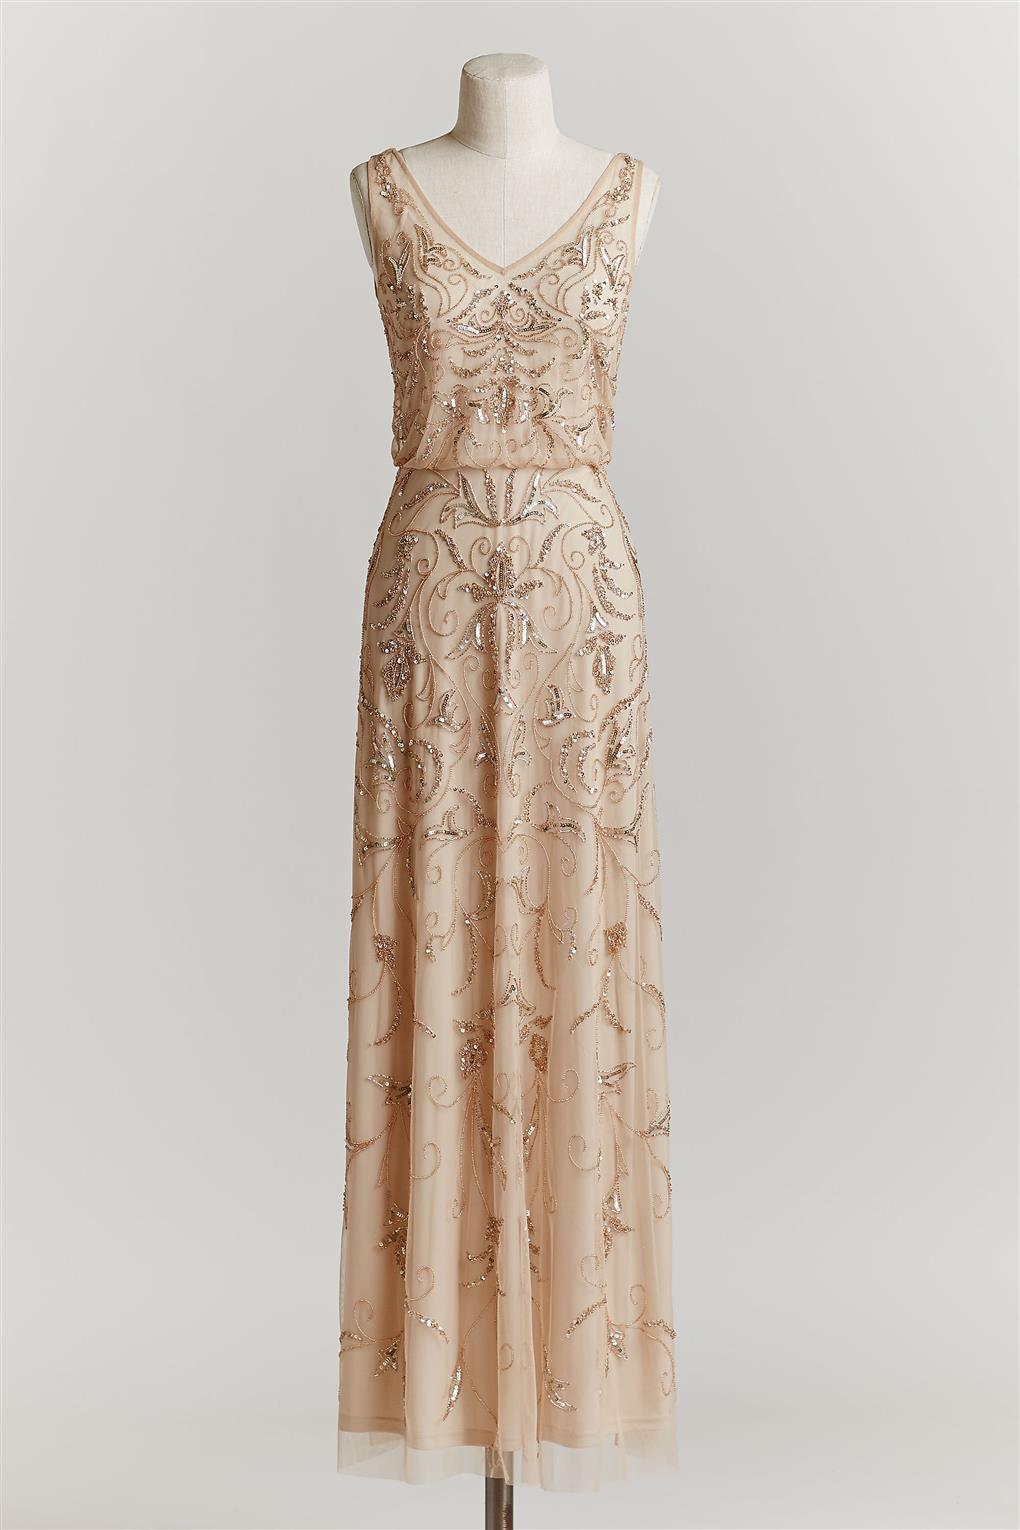 Blush Ascot Dress from BHLDN's Spring 2015 Bridal Collection